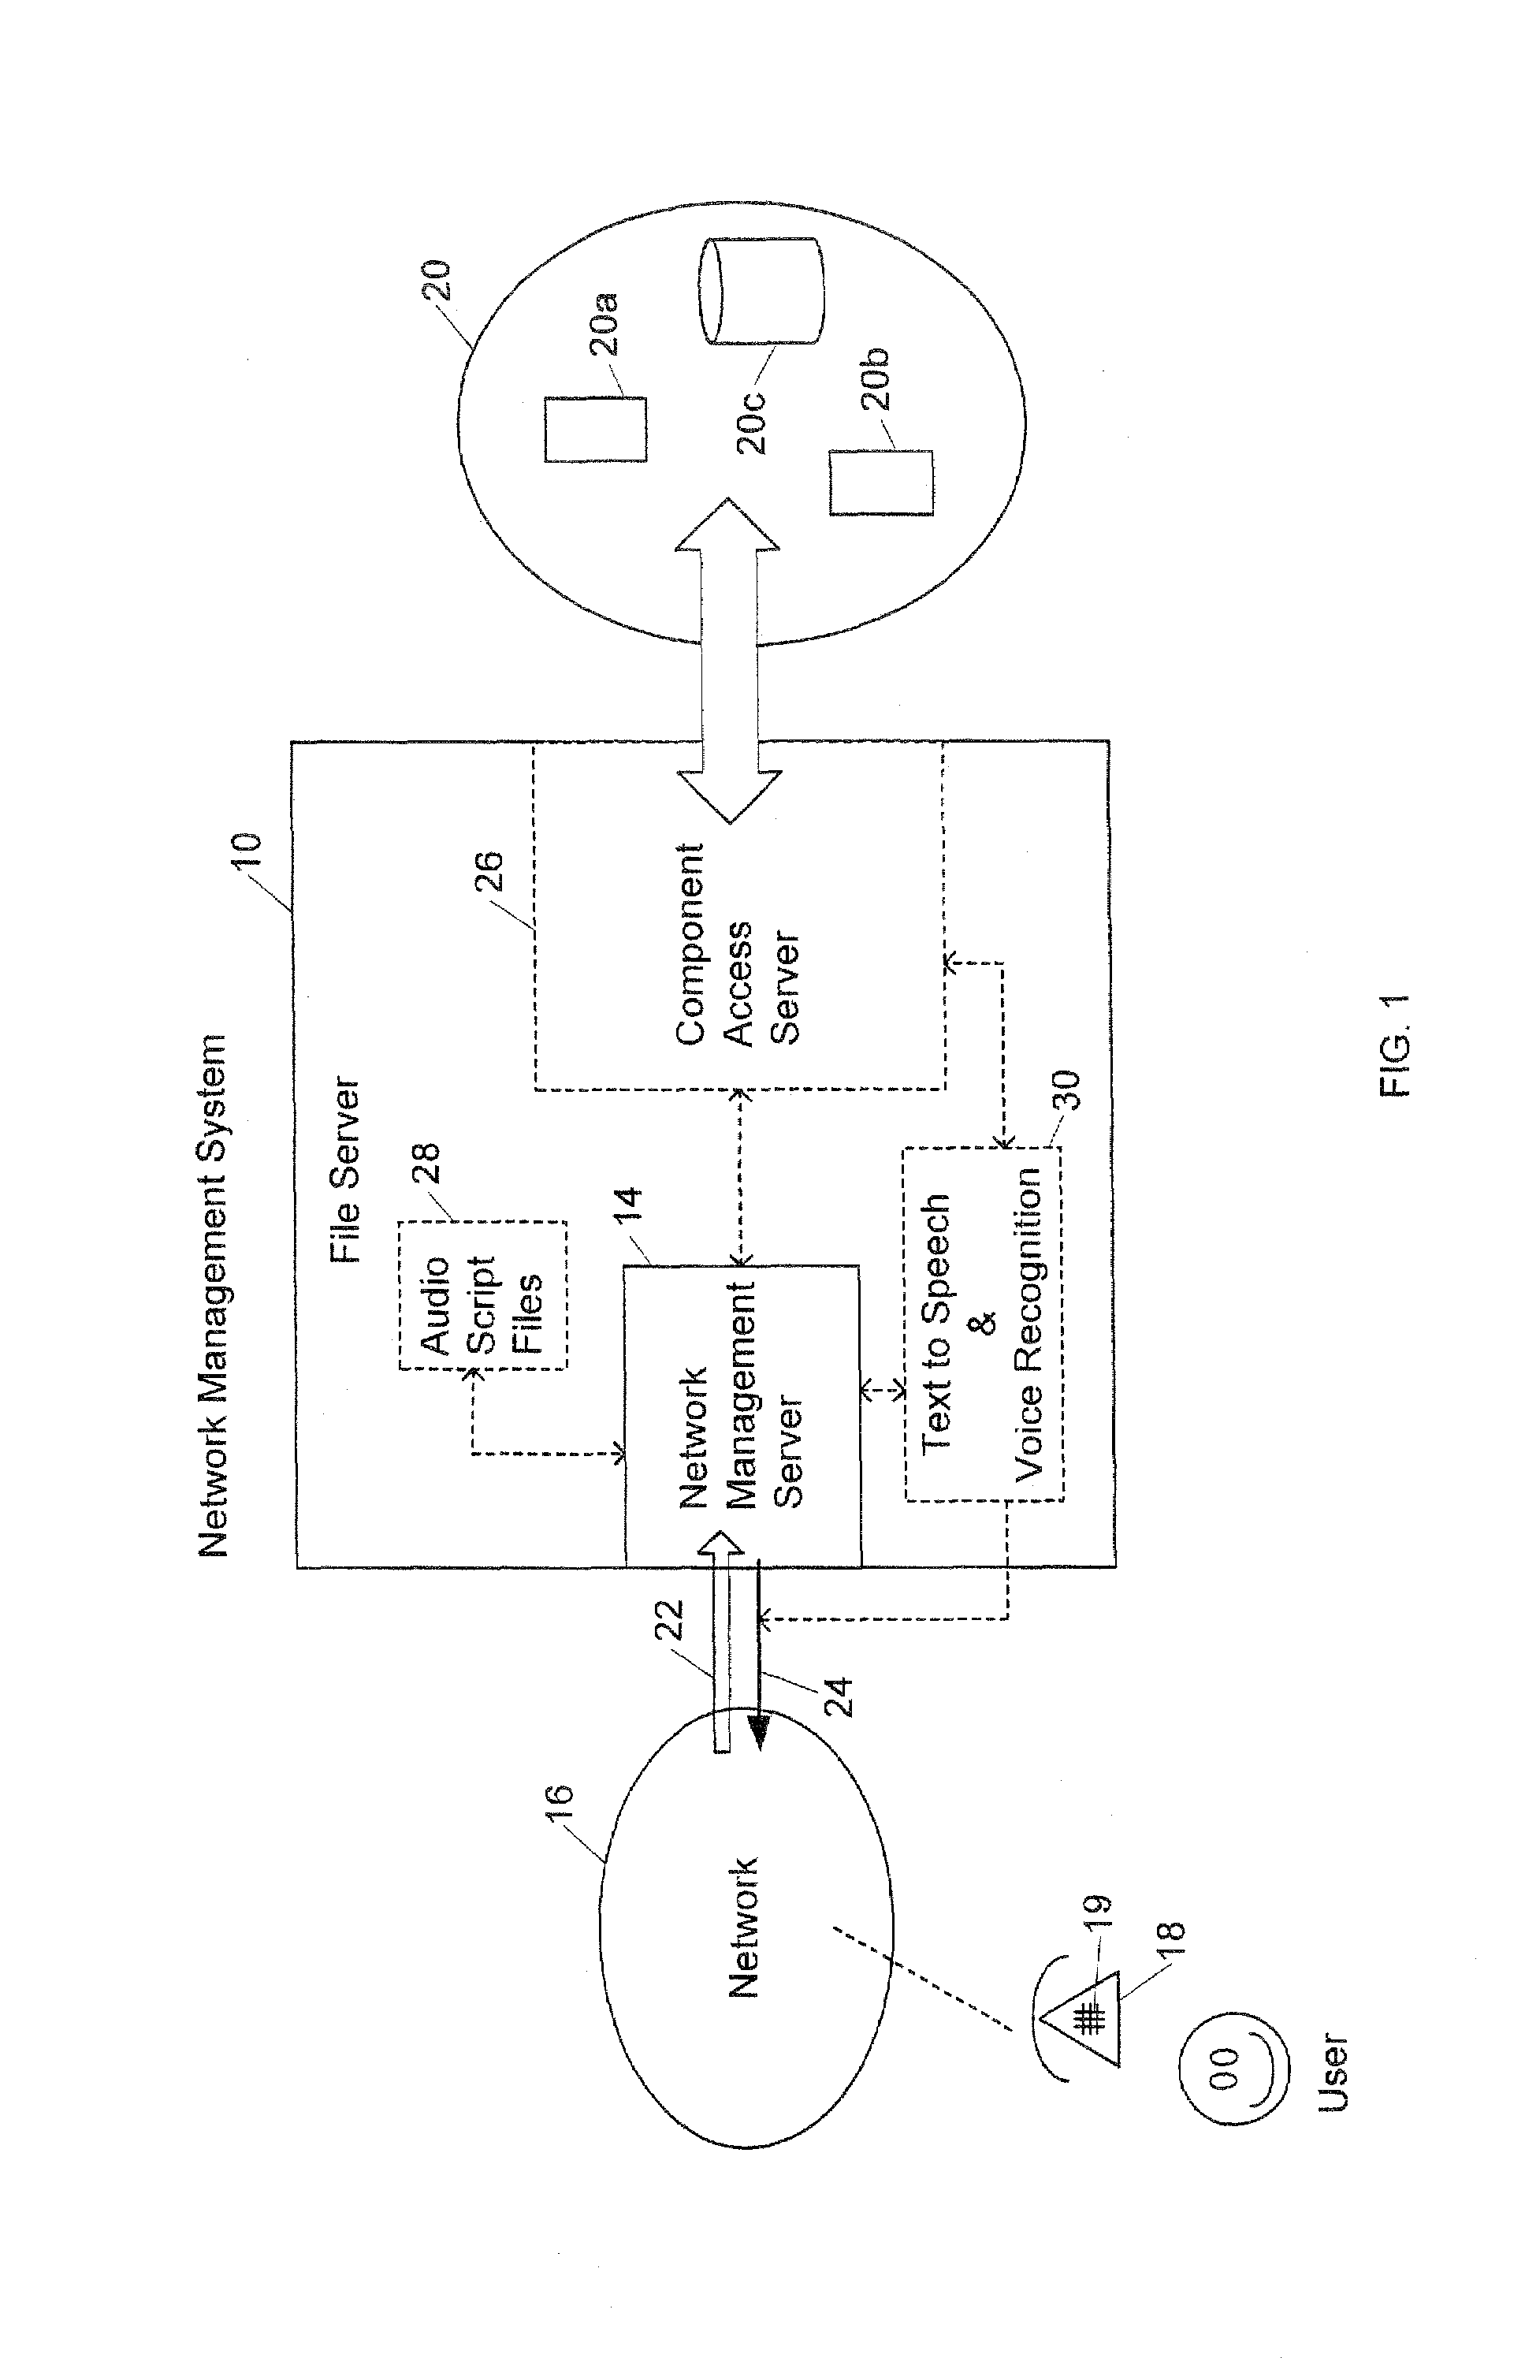 System and method for voice based network management